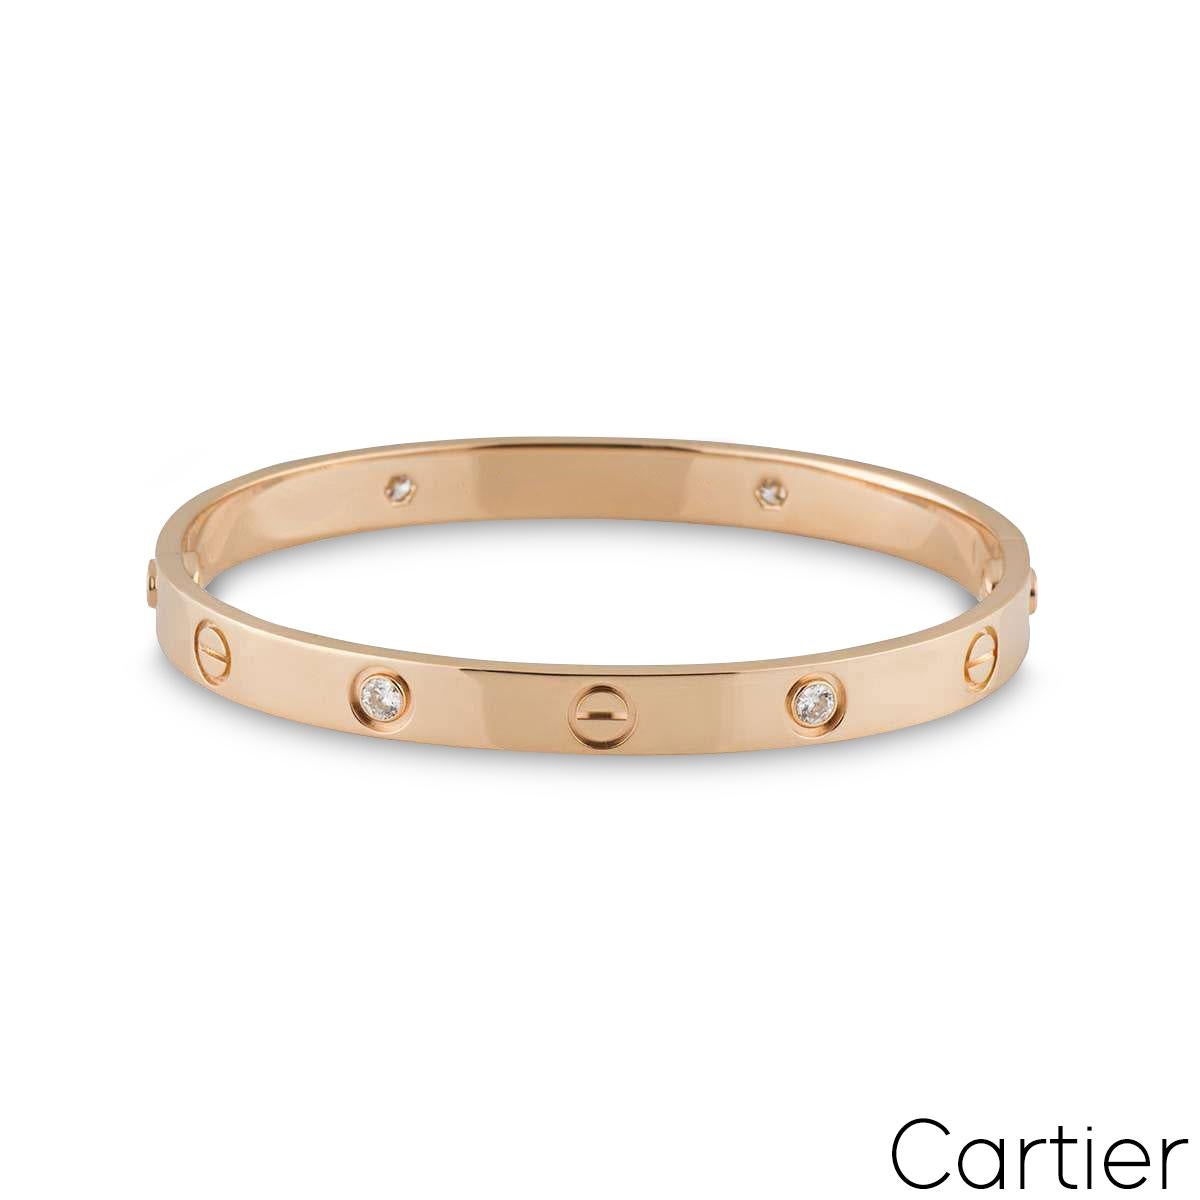 An iconic 18k rose gold half diamond Cartier bracelet from the Love collection. The iconic screw motif alternates with 4 round brilliant cut diamonds on the outer edge of the bracelet totalling 0.42ct. The bracelet is a size 19 and features the new